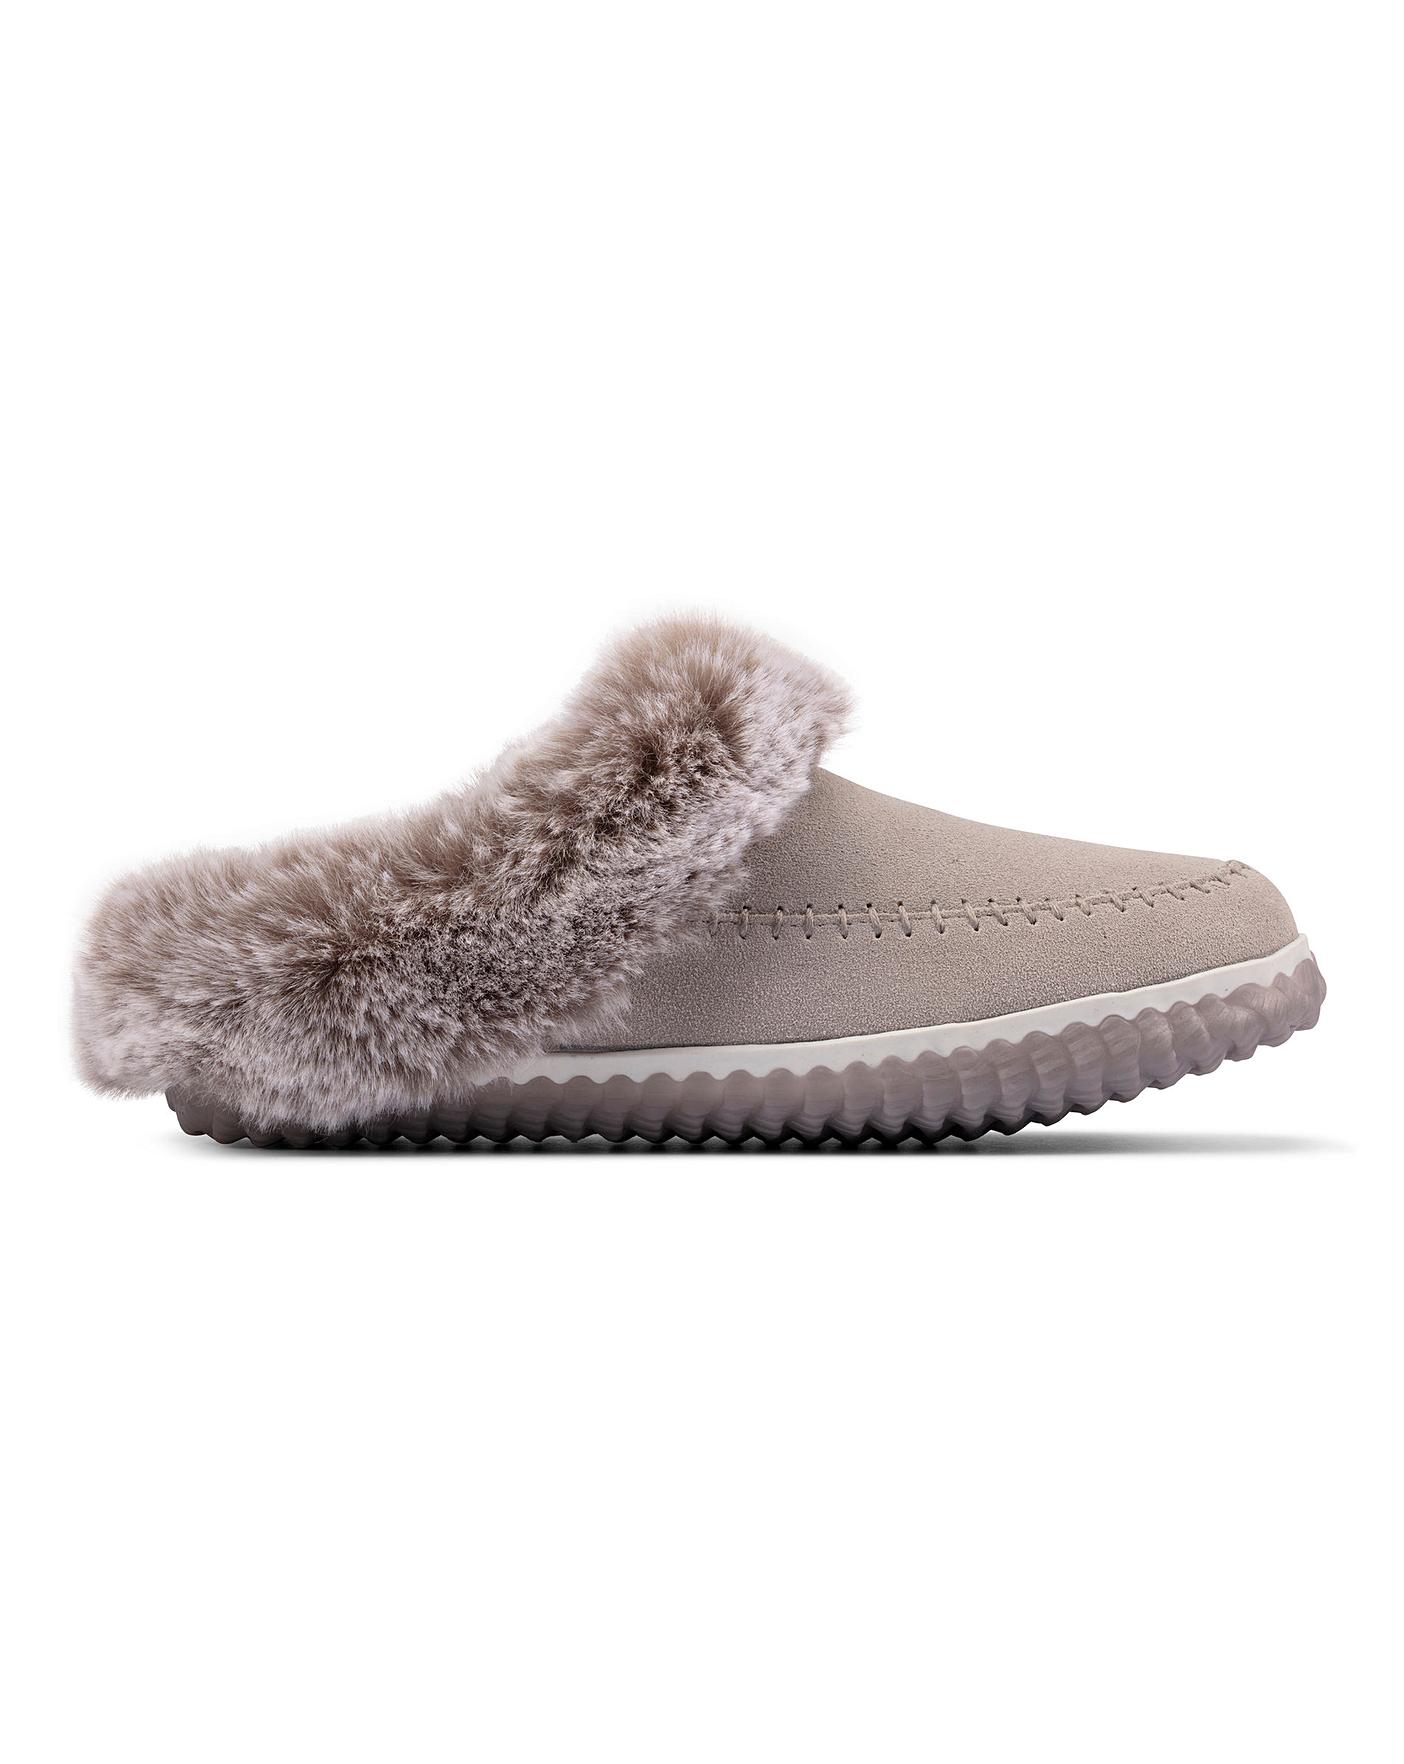 soft fit slippers